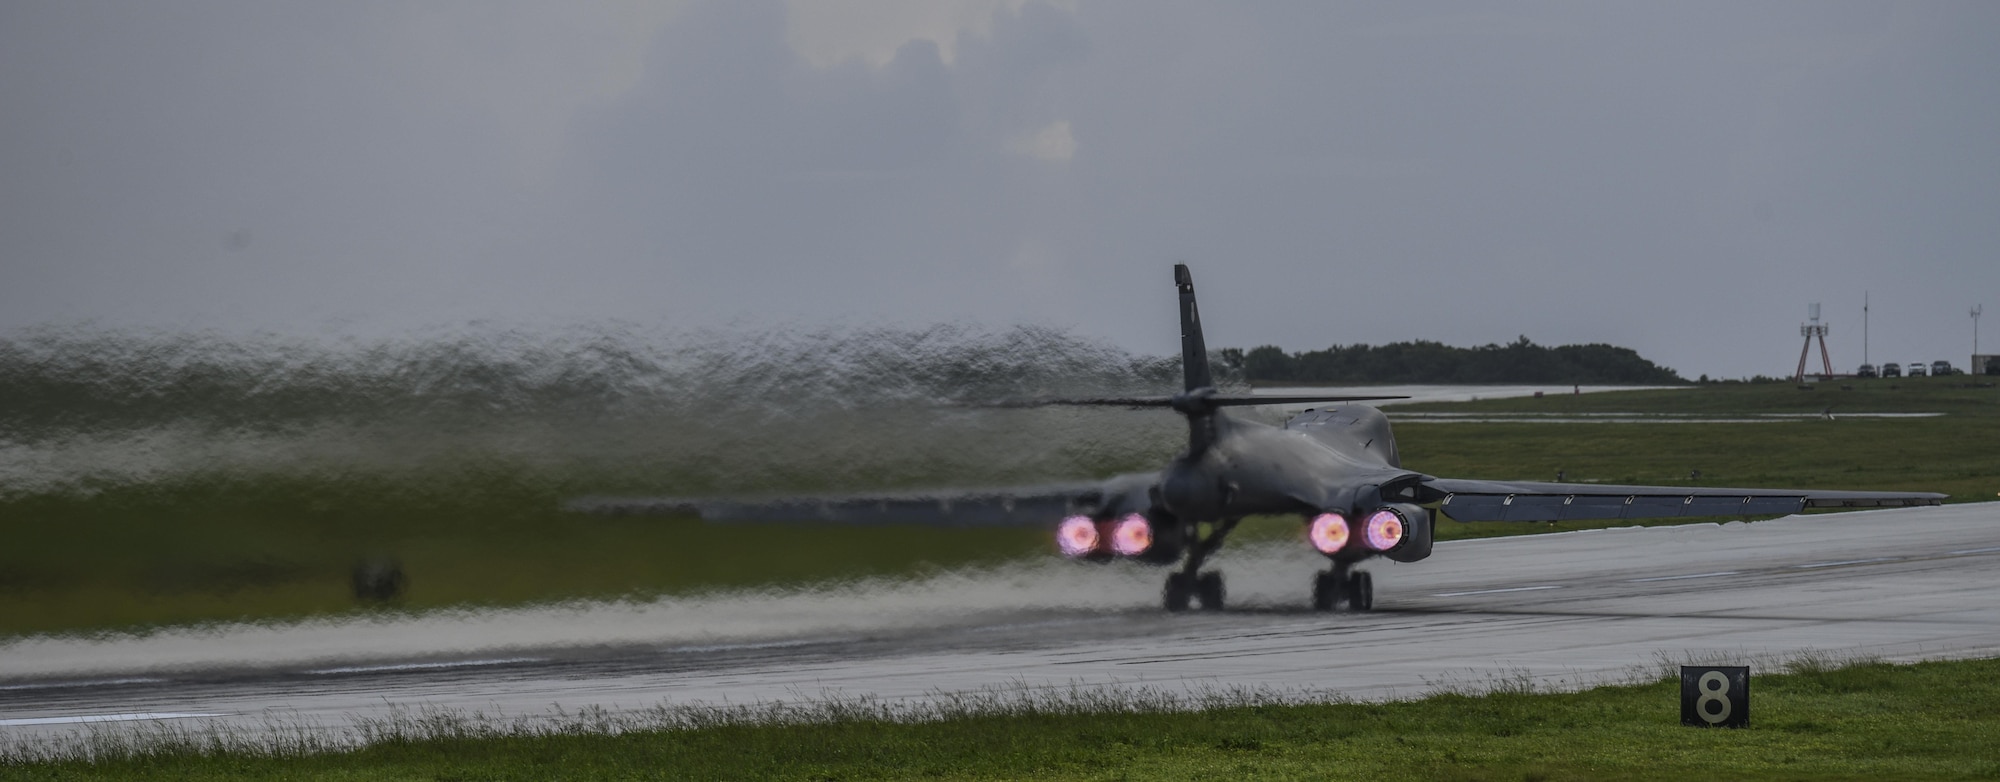 A U.S. Air Force B-1B Lancer aircraft assigned to the 9th Expeditionary Bomb Squadron, deployed from Dyess Air Force Base, Texas, takes off from Andersen Air Force Base, Guam, for a 10-hour mission, flying in the vicinity of Kyushu, Japan, the East China Sea, and the Korean peninsula, June 20, 2017. The normal/routine employment of continuous bomber presence (CBP) missions in the U.S. Pacific Command’s area of responsibility since March 2004 are in accordance with international law & are vital to the principles that are the foundation of the rules-based global operating system.  (U.S. Air Force photo/Tech. Sgt. Richard P. Ebensberger)